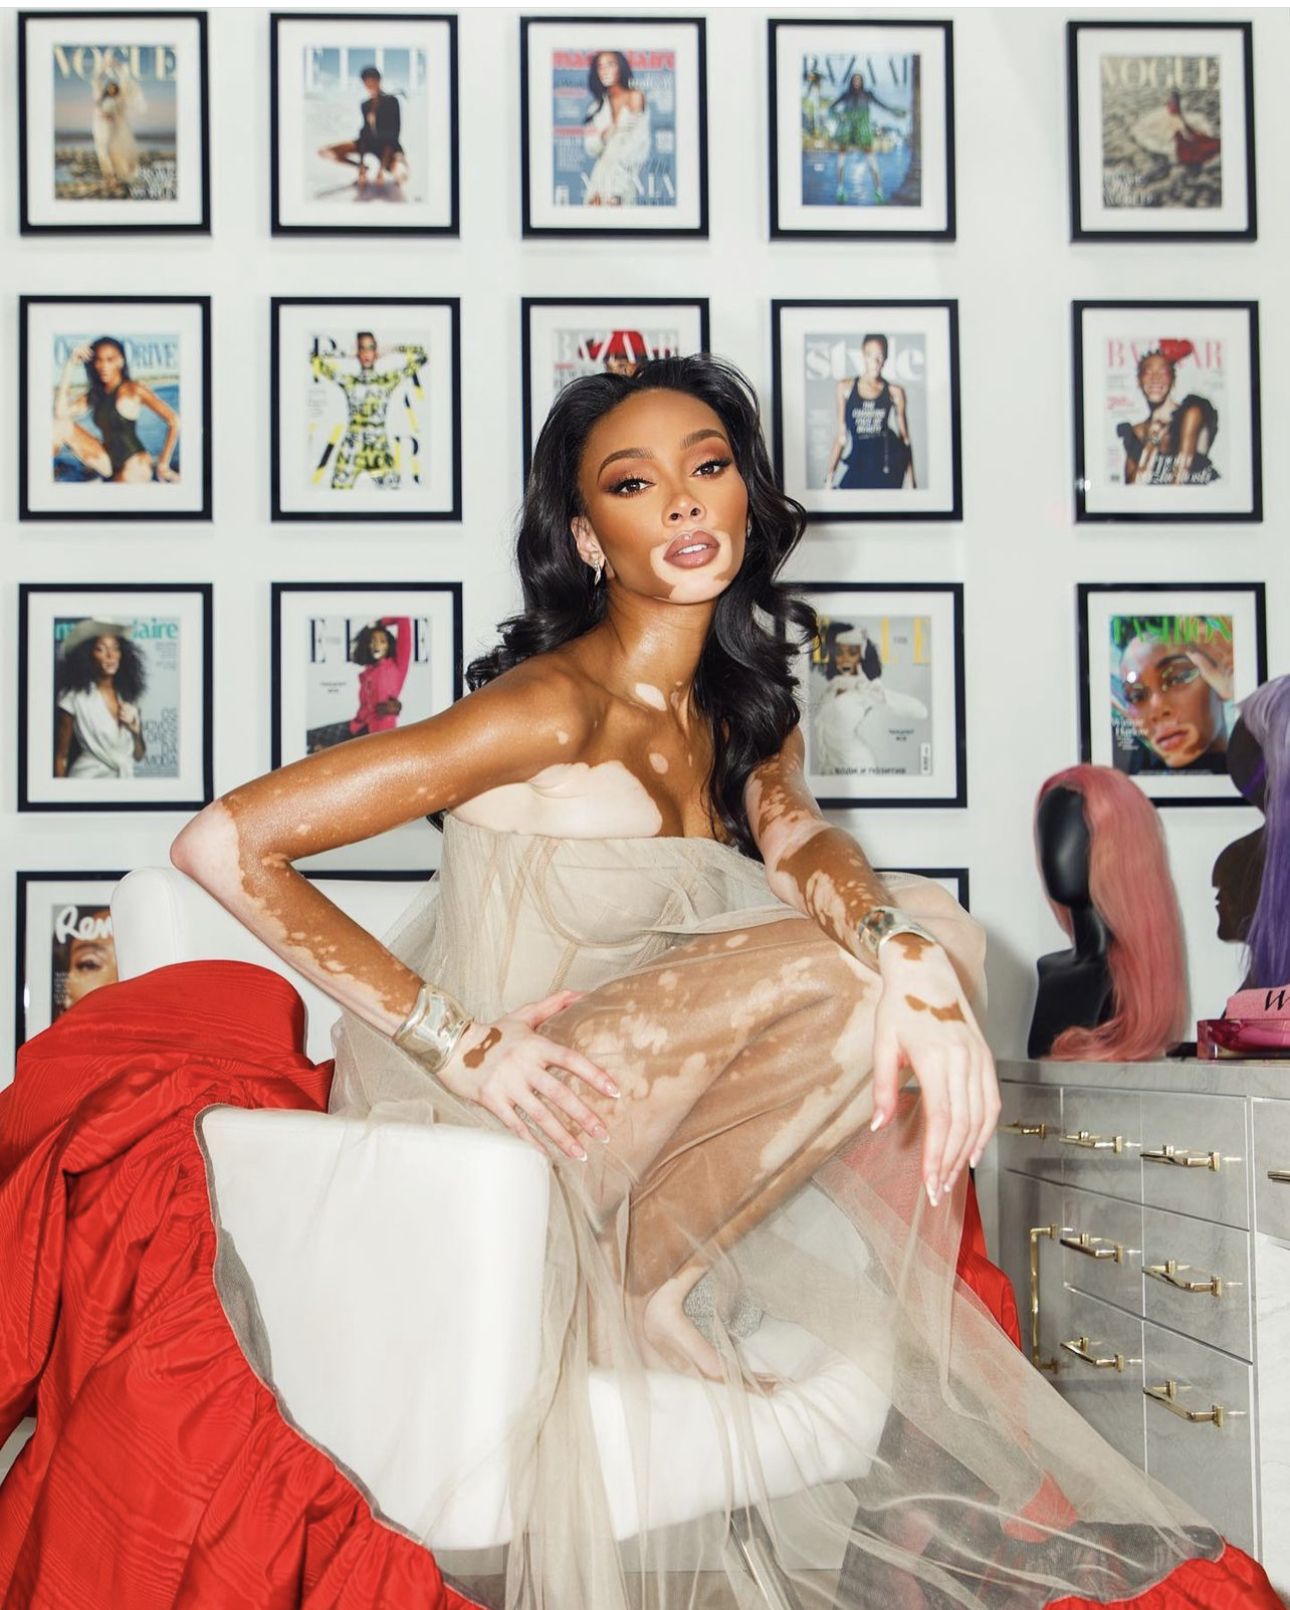 Architectural Digest Takes A Peek Inside Supermodel Winnie Harlow’s Home